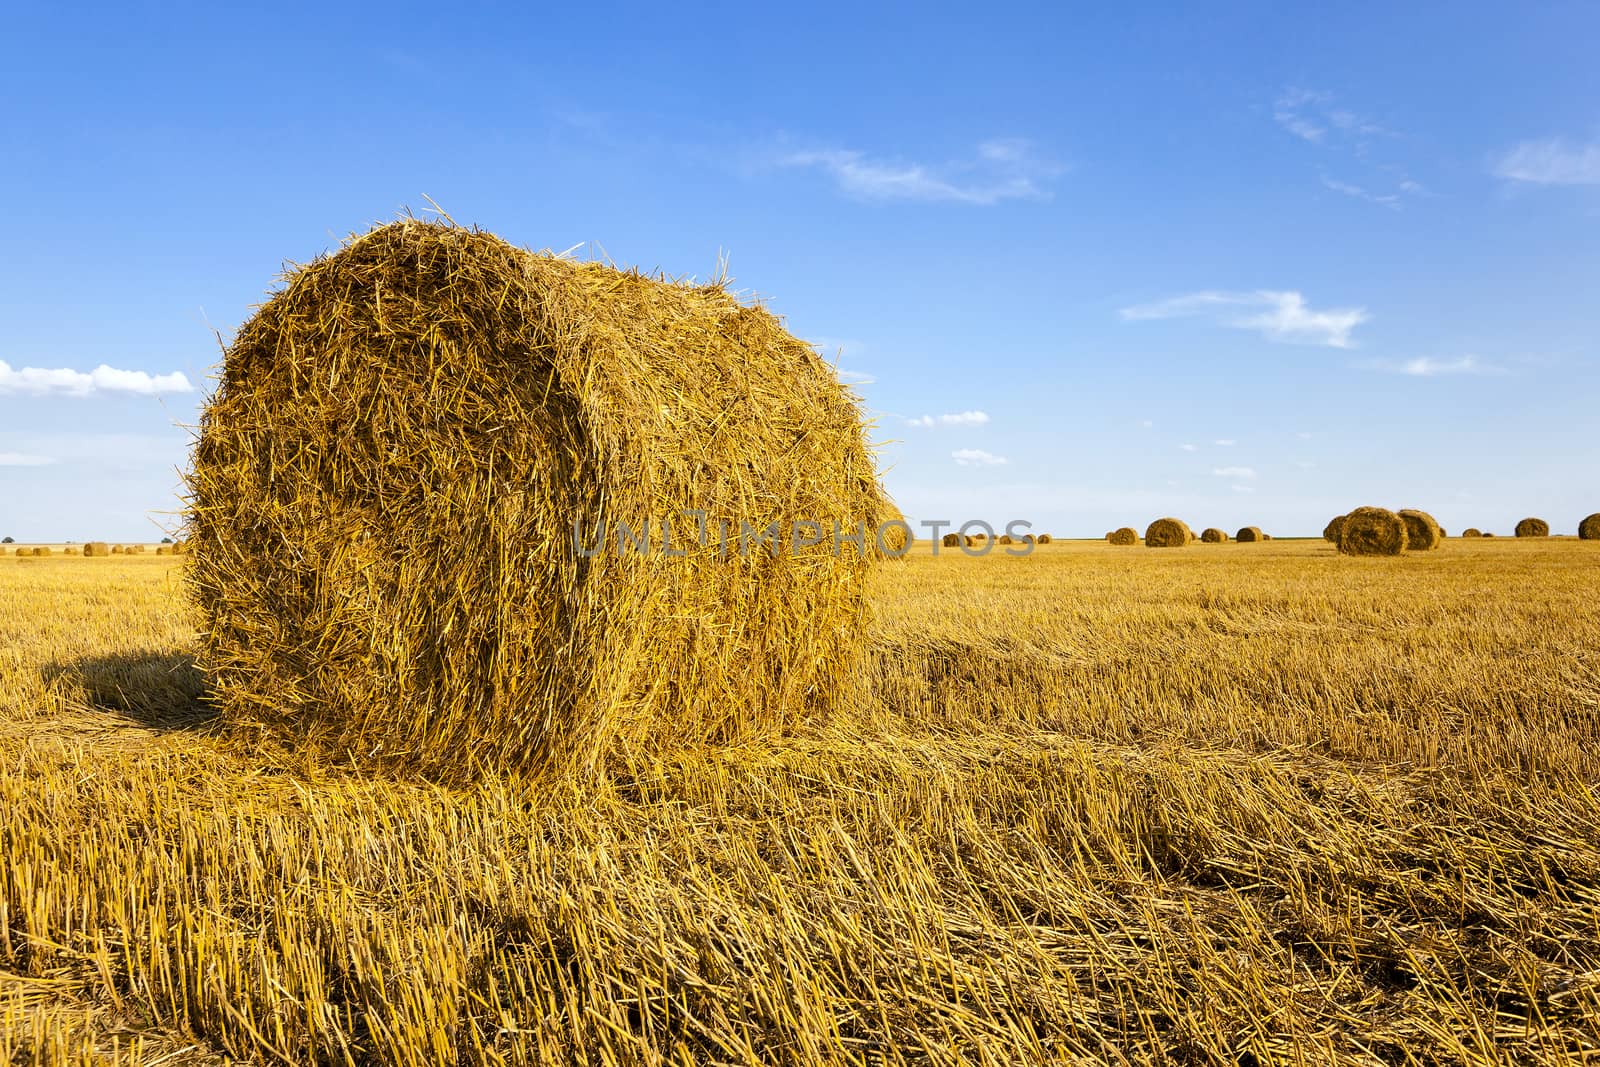   the stack of straw which is on an agricultural field